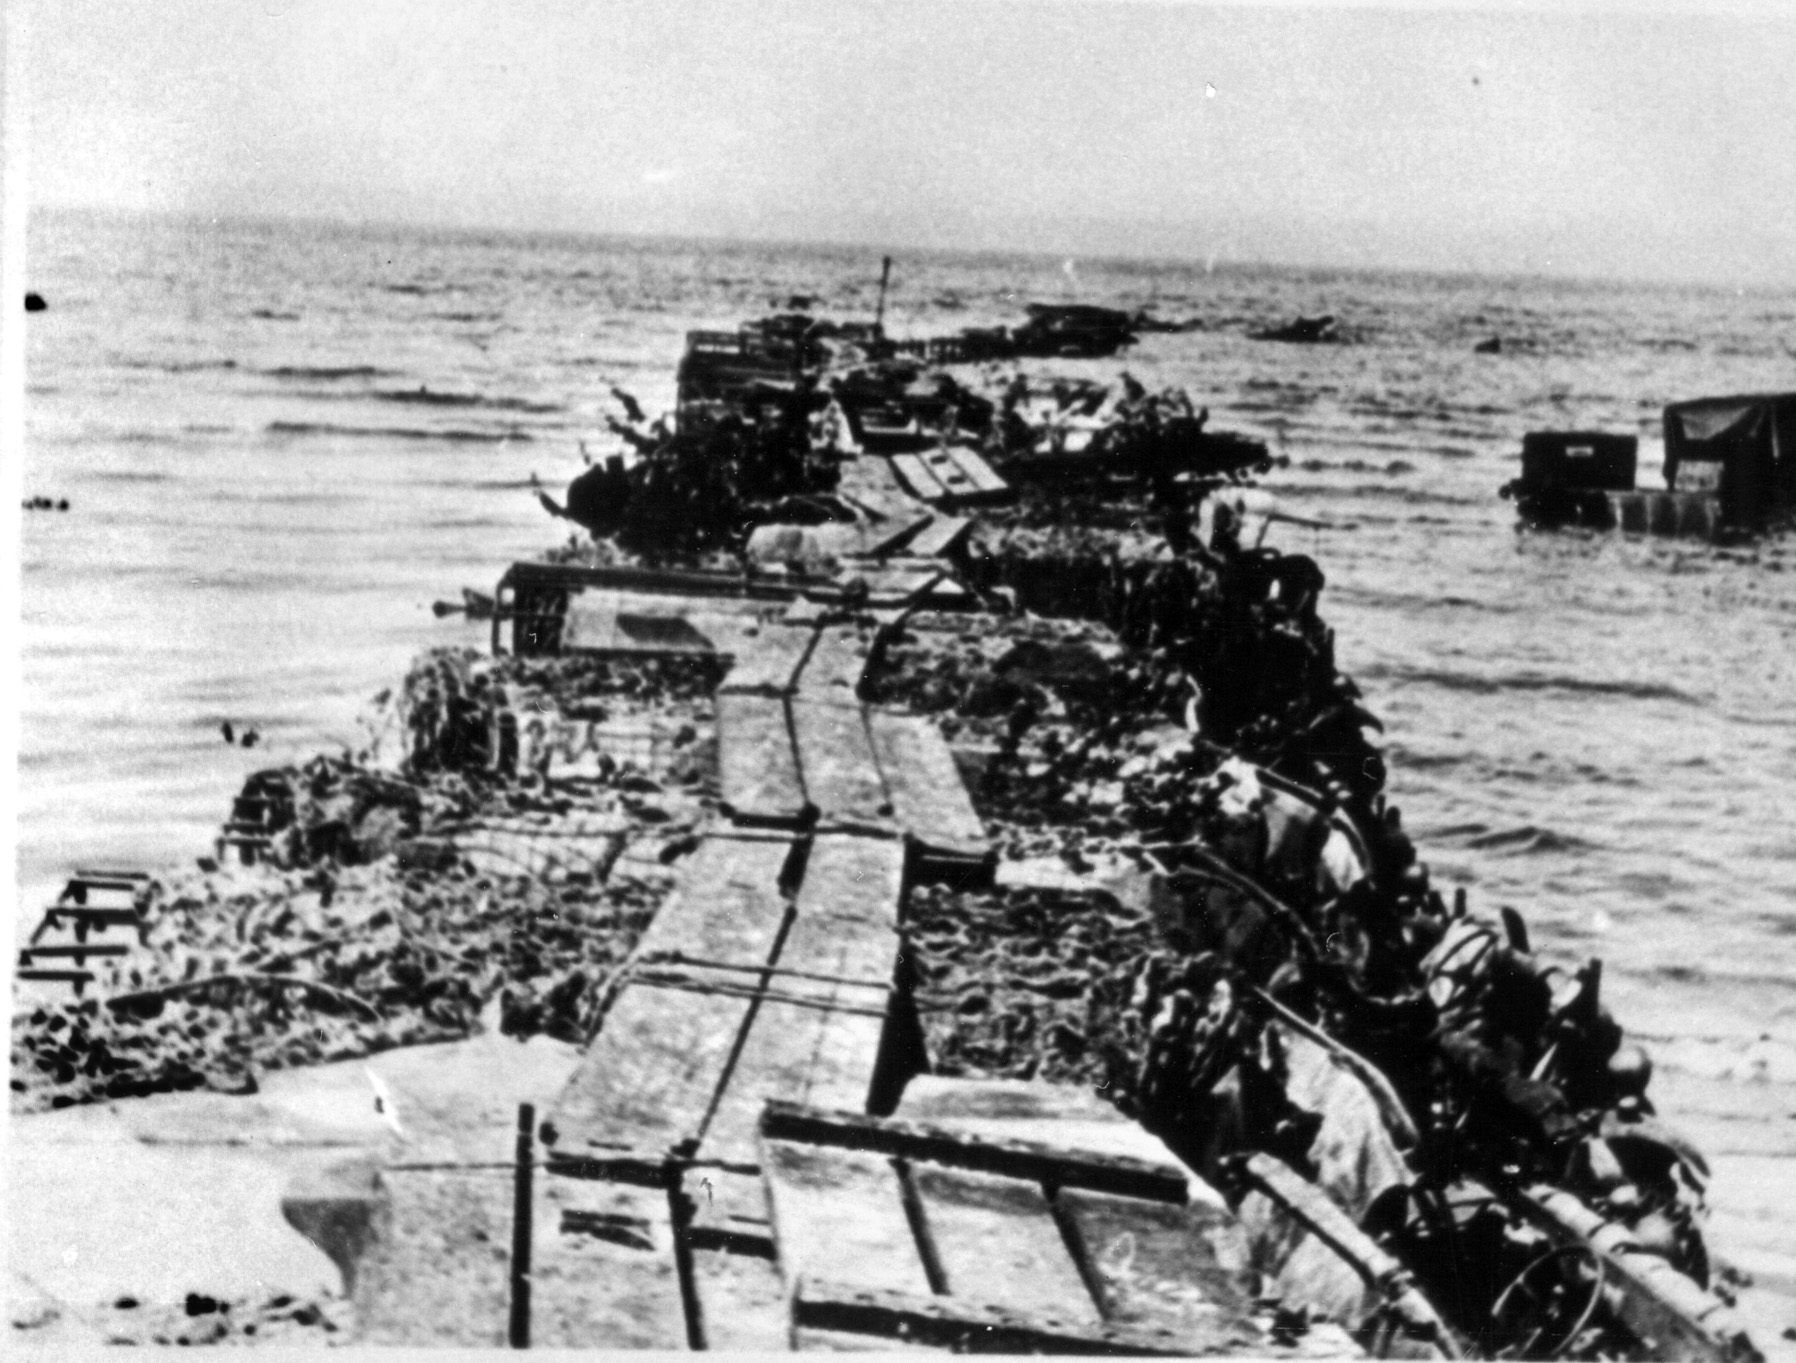 This makeshift jetty was constructed atop vehicles driven into the waters of the English Channel at Dunkirk allowing soldiers to board ships more quickly.